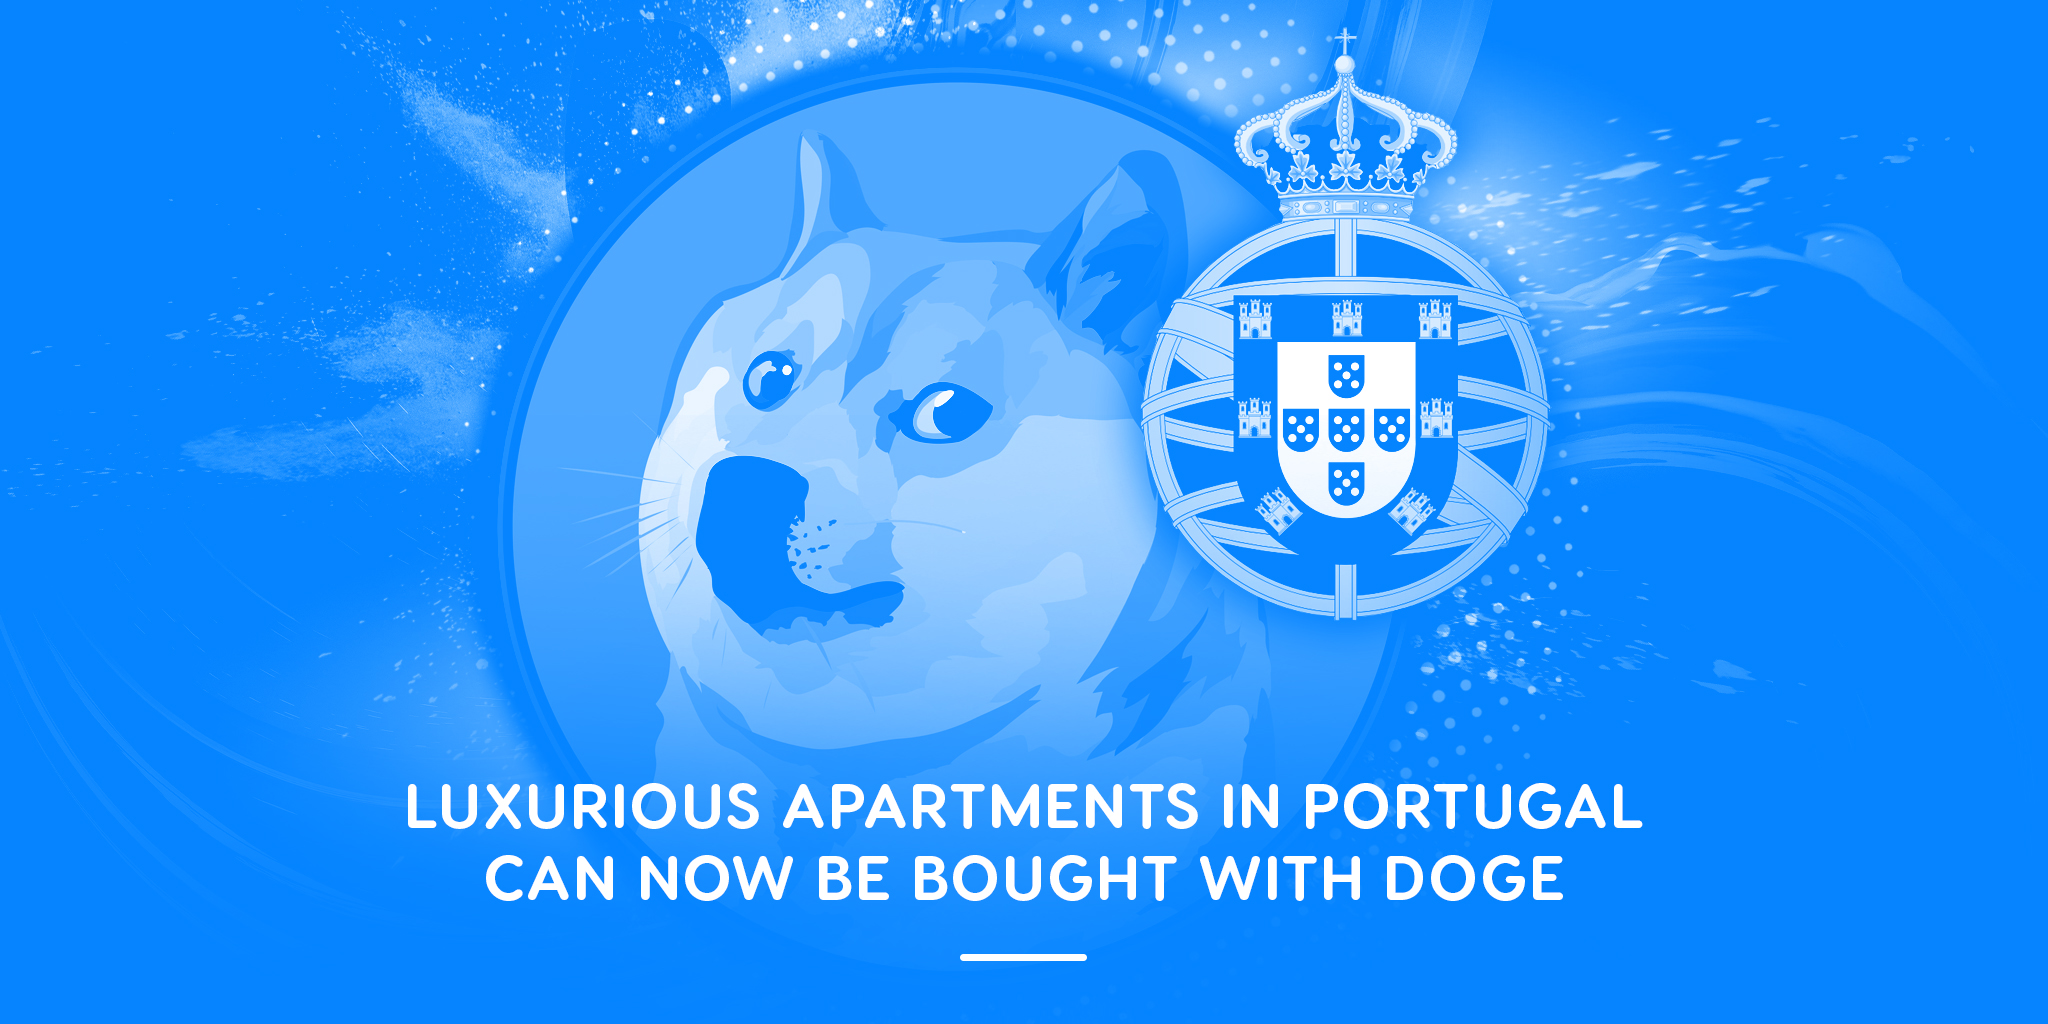 Luxurious apartments in Portugal can now be bought with DOGE